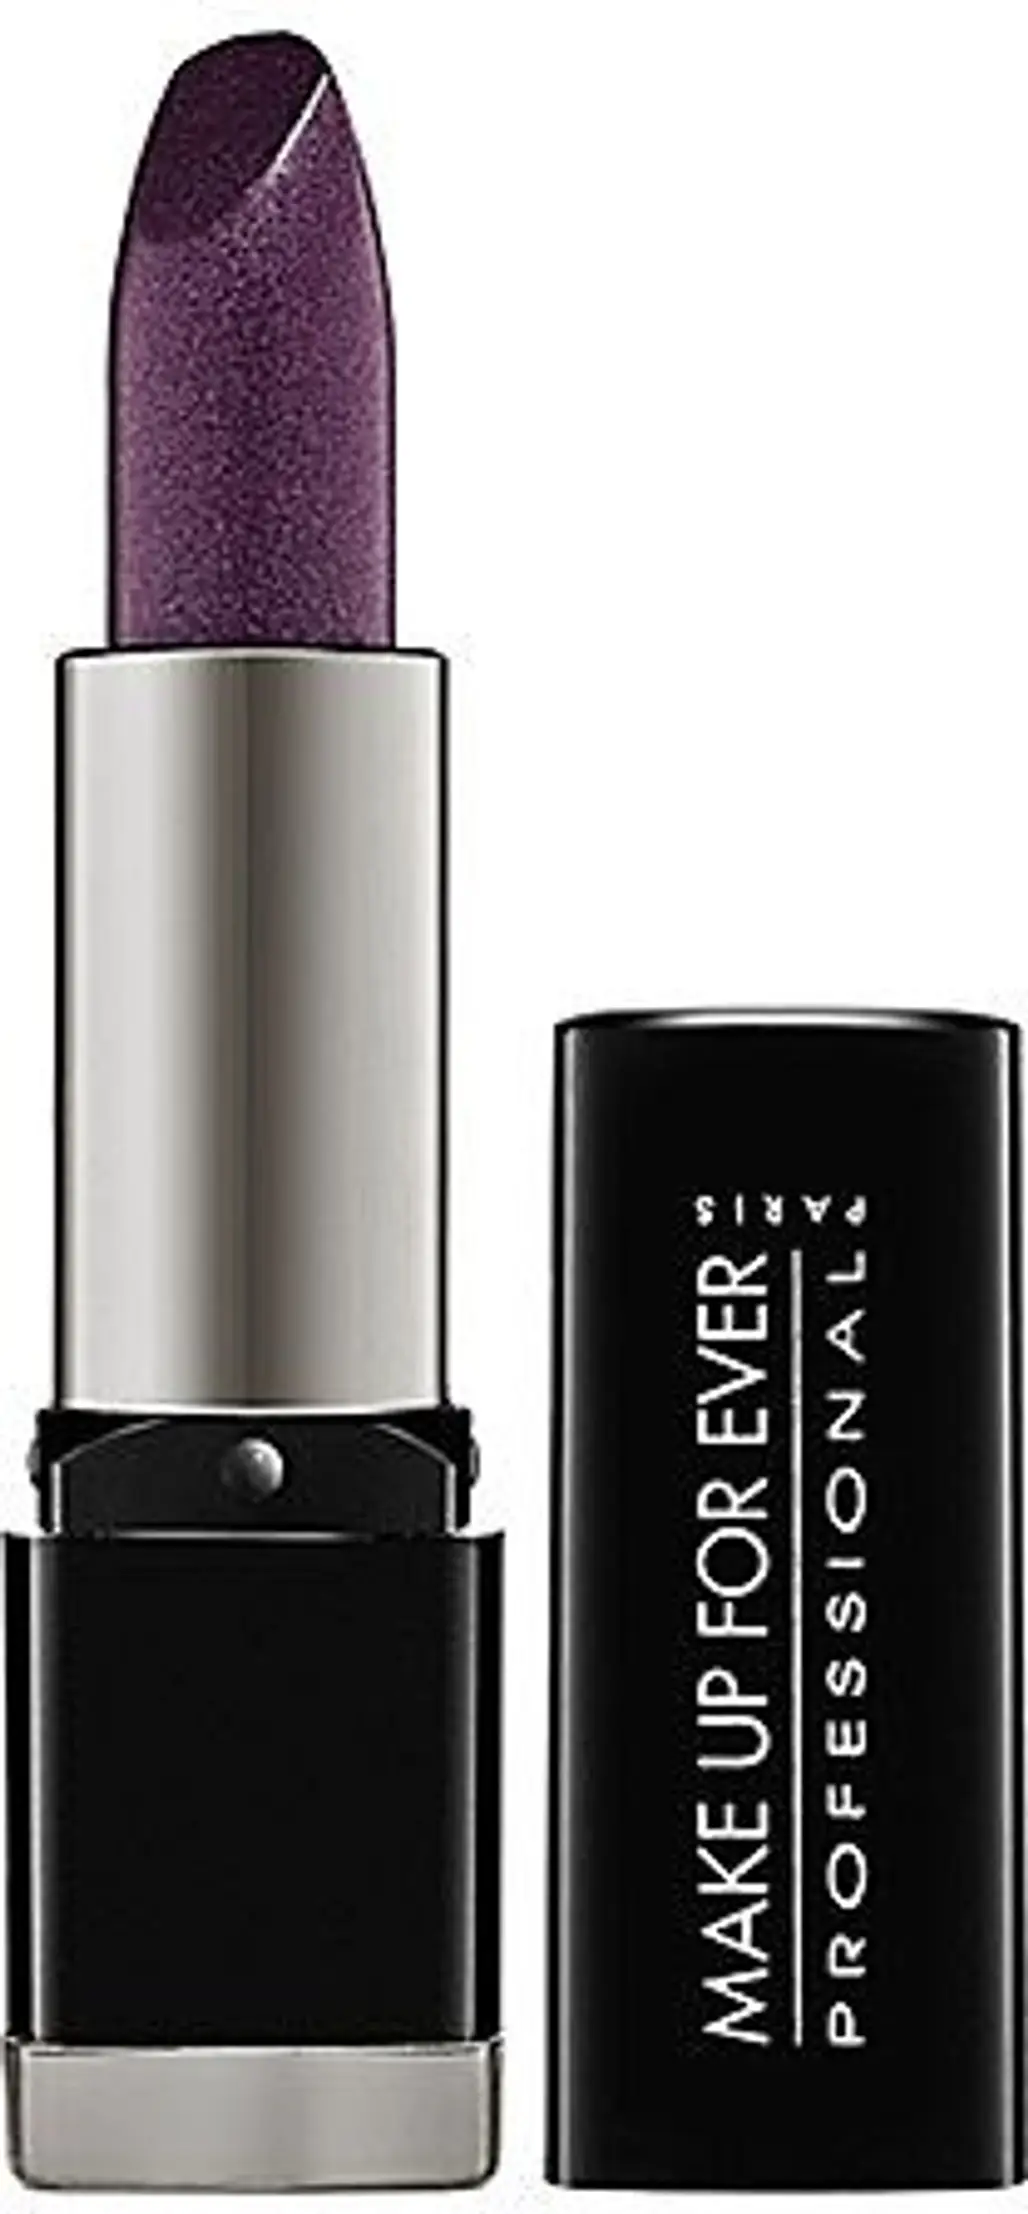 Makeup Forever Rouge Artist Intense in Pearly Dark Violet